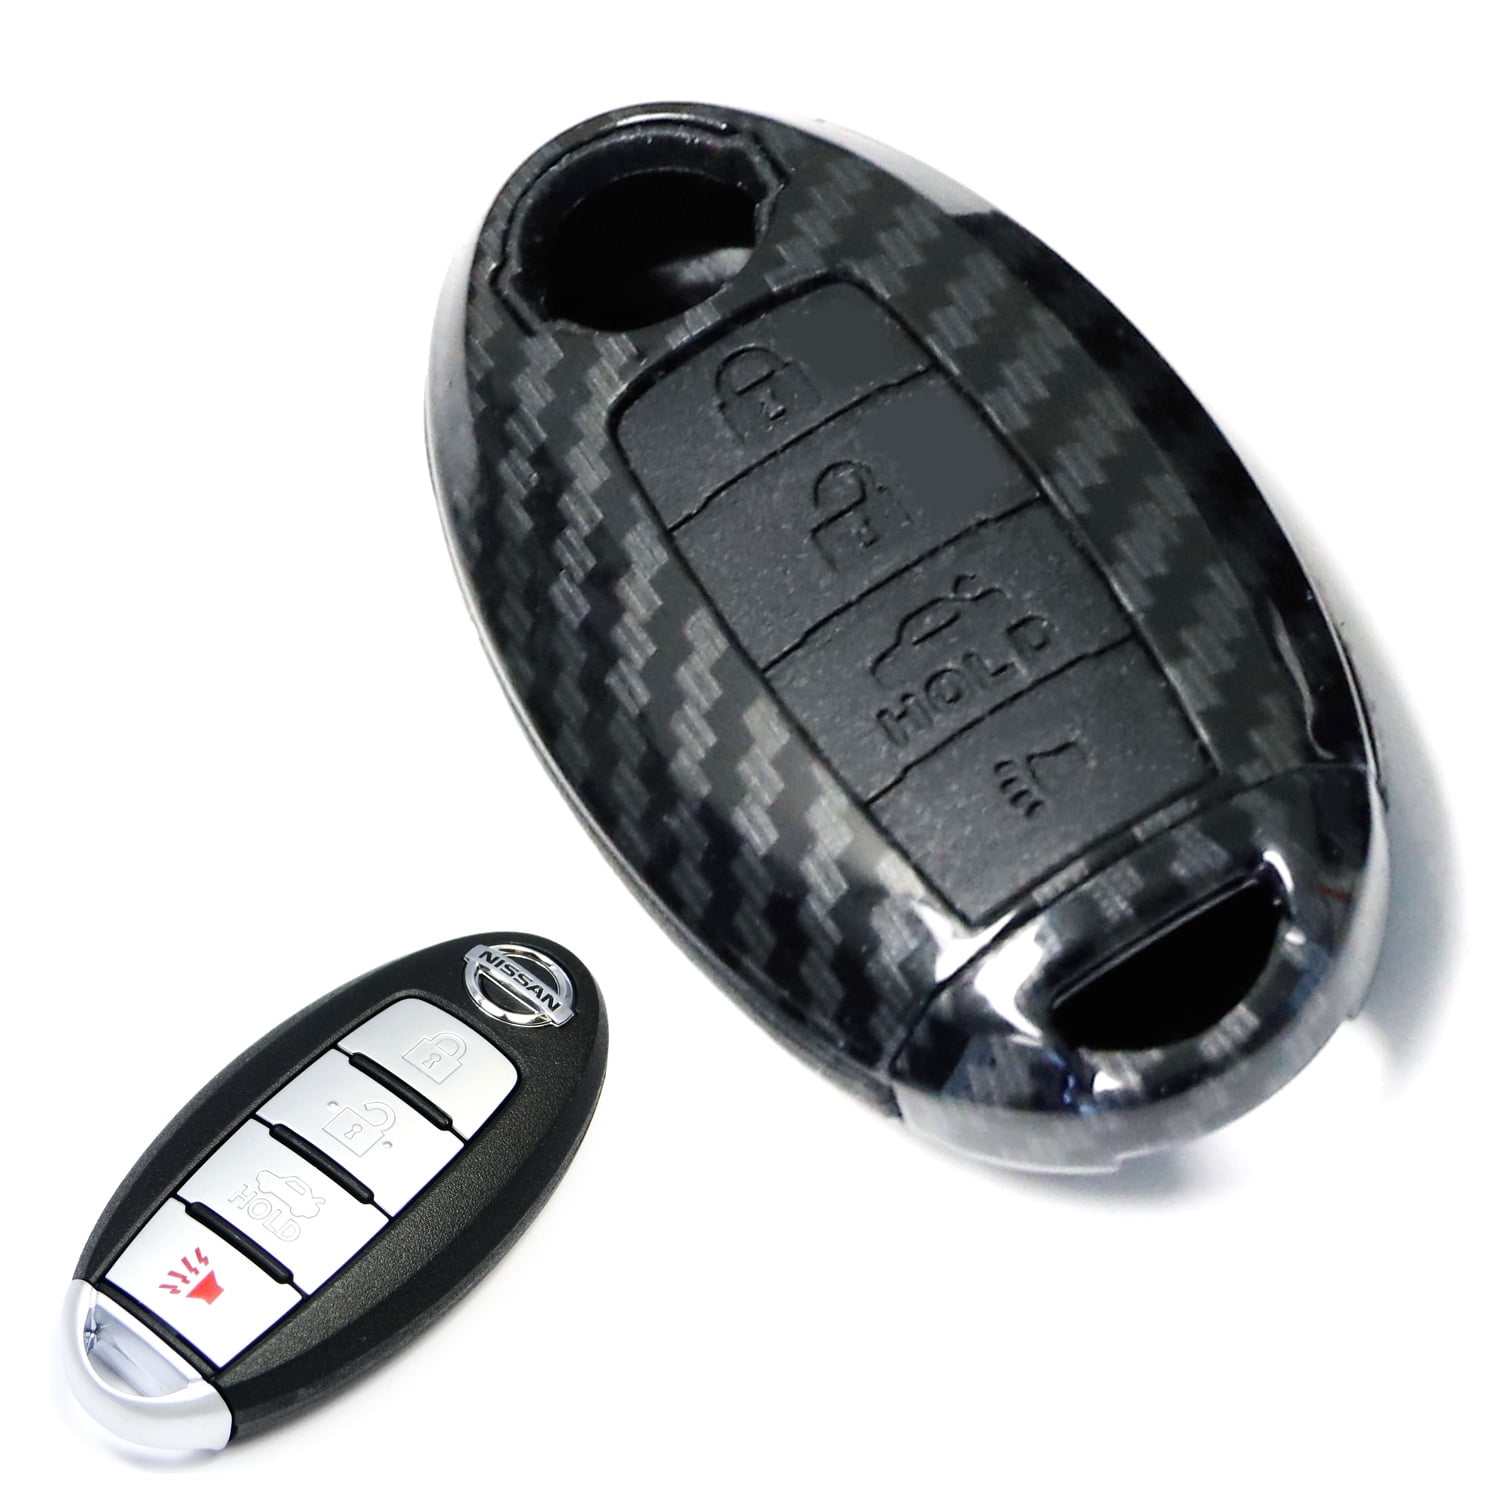 x xotic tech Real Carbon Fiber Remote Smart Keyless Key Case Fob Shell Cover for Audi A4 A5 TT Q7 2016 and up Xotic Tech Direct